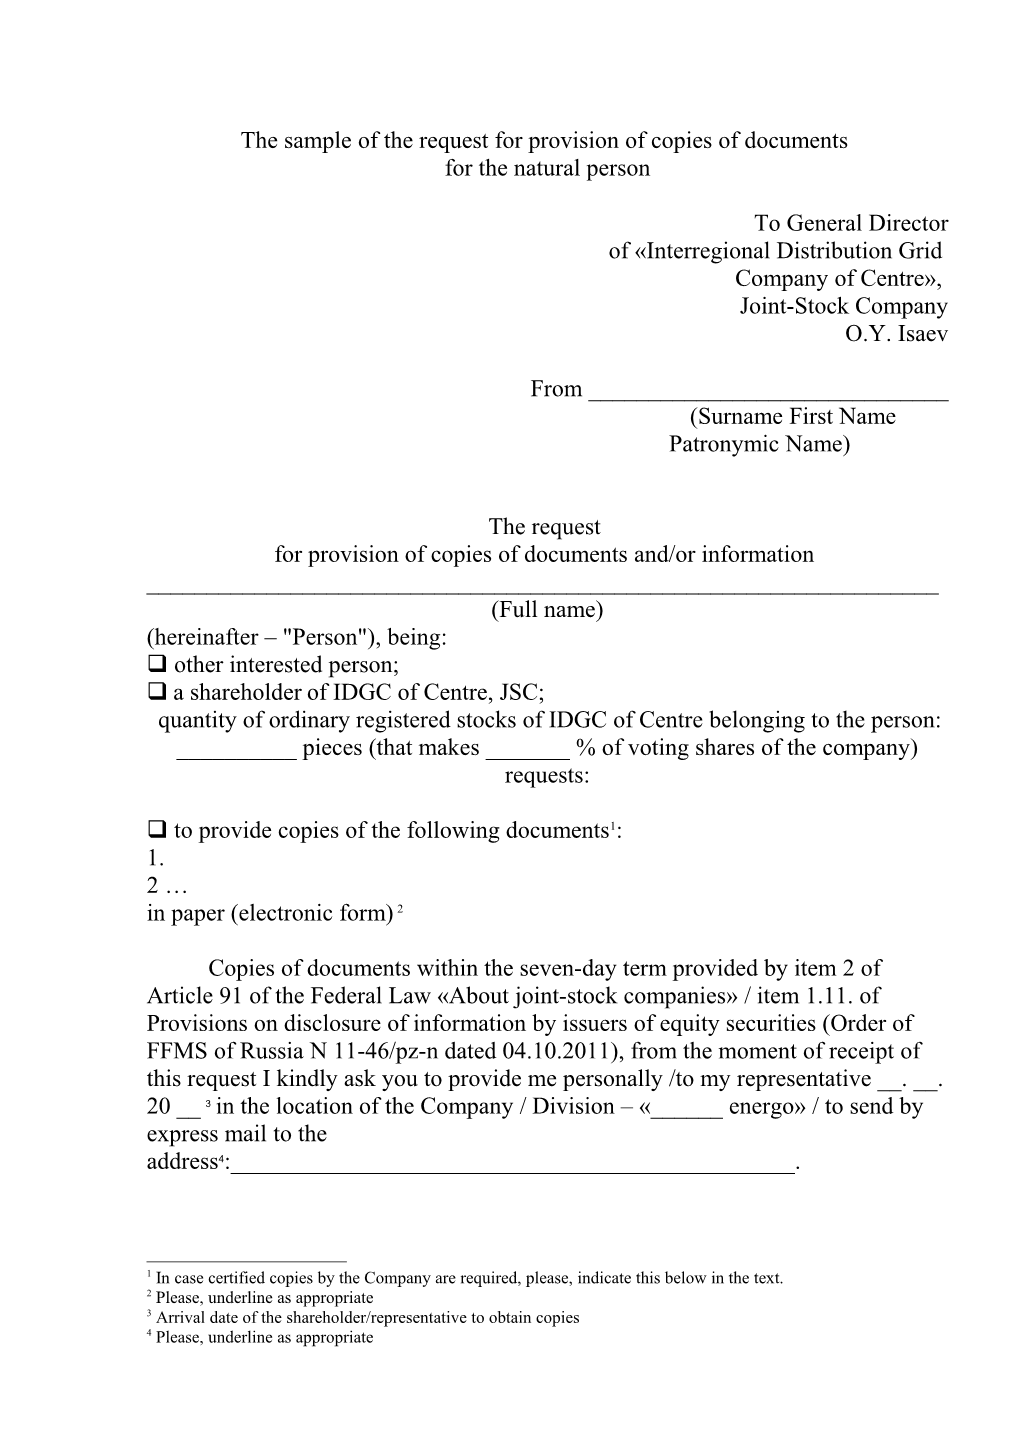 The Sample of the Request for Provision of Copies of Documents